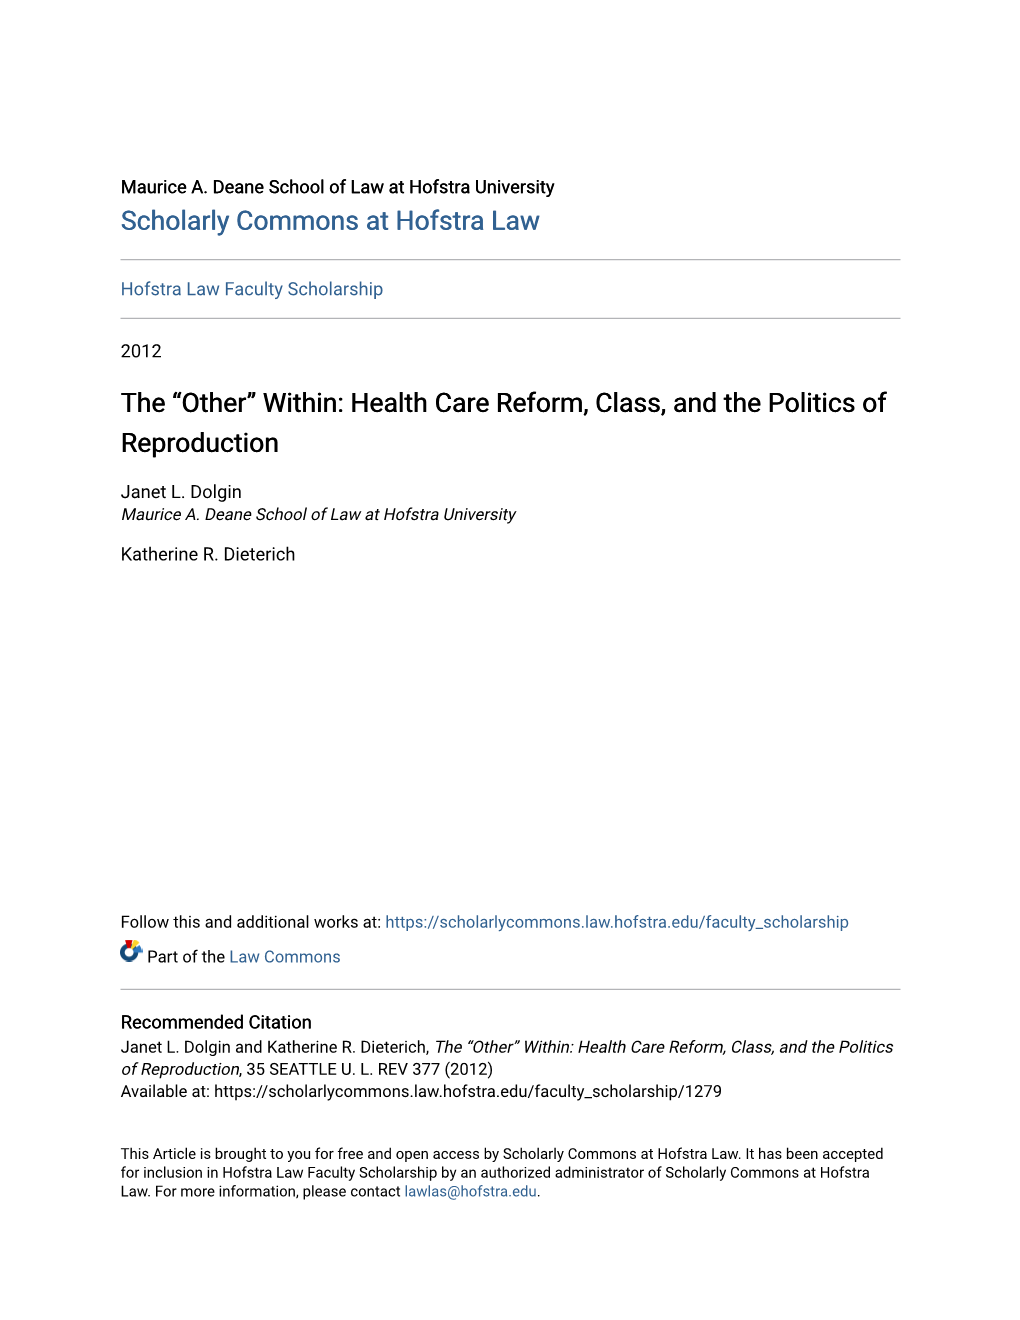 Health Care Reform, Class, and the Politics of Reproduction